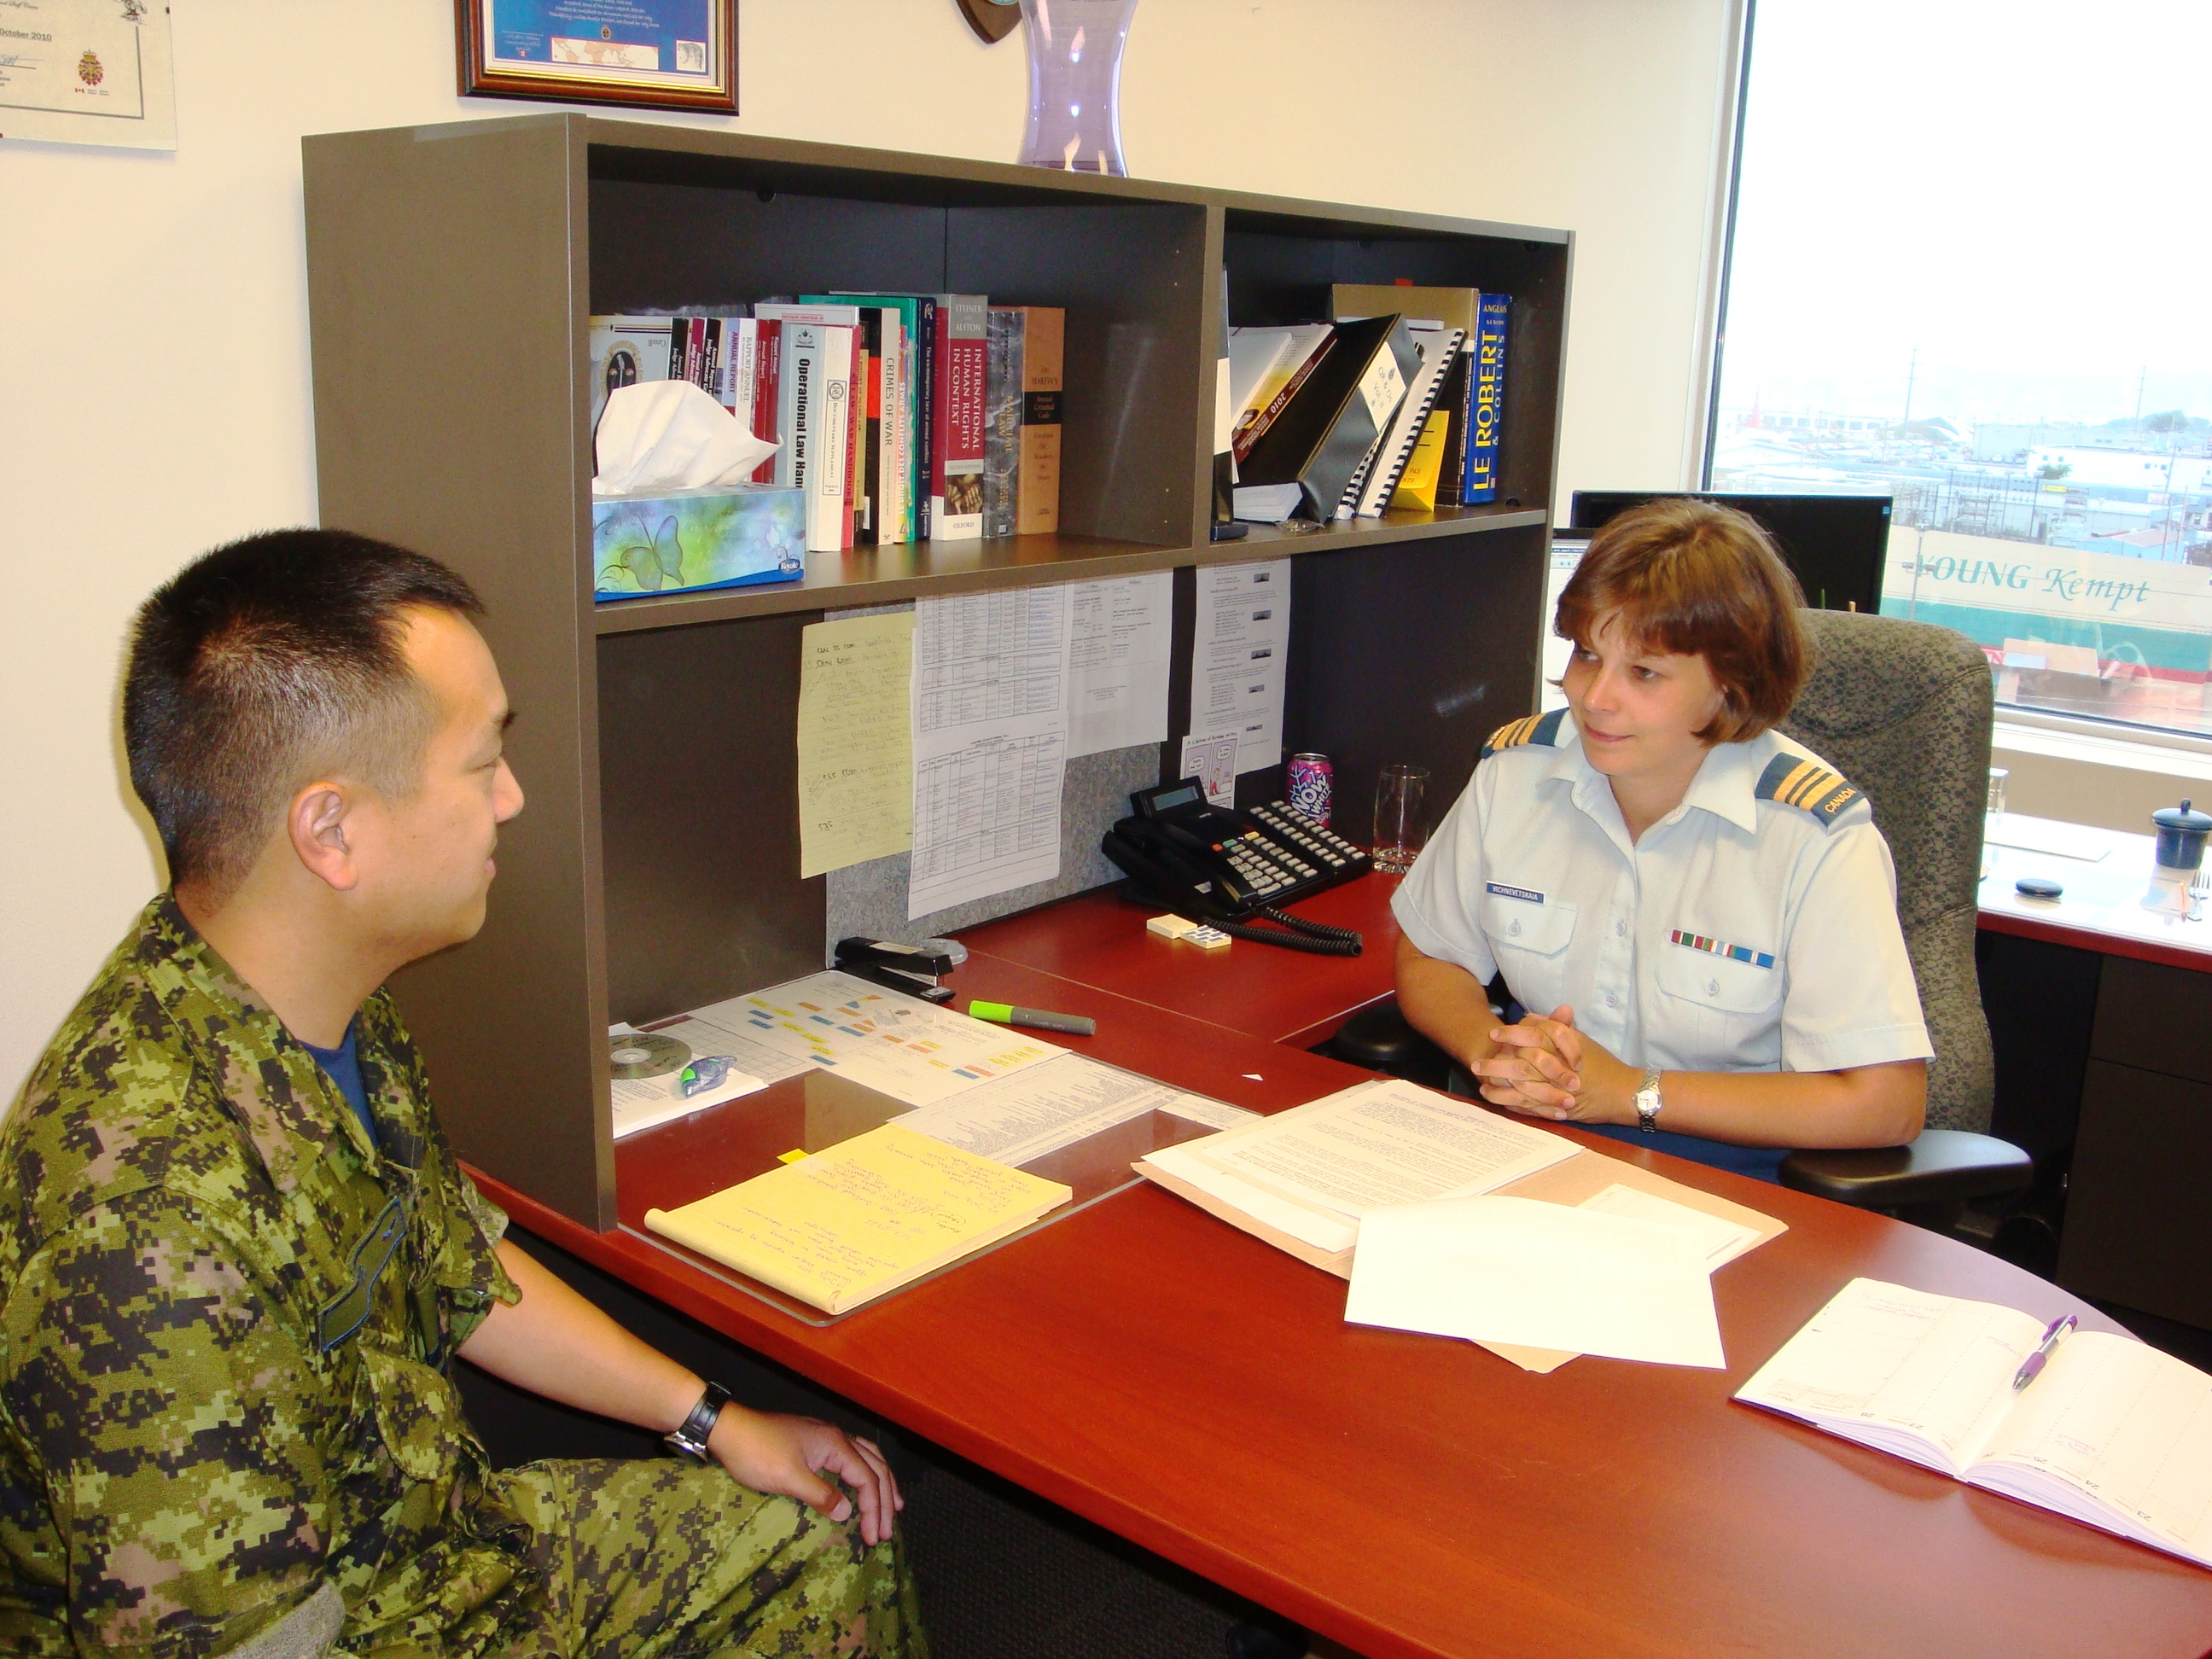 Legal officer consulting with a client in her office.